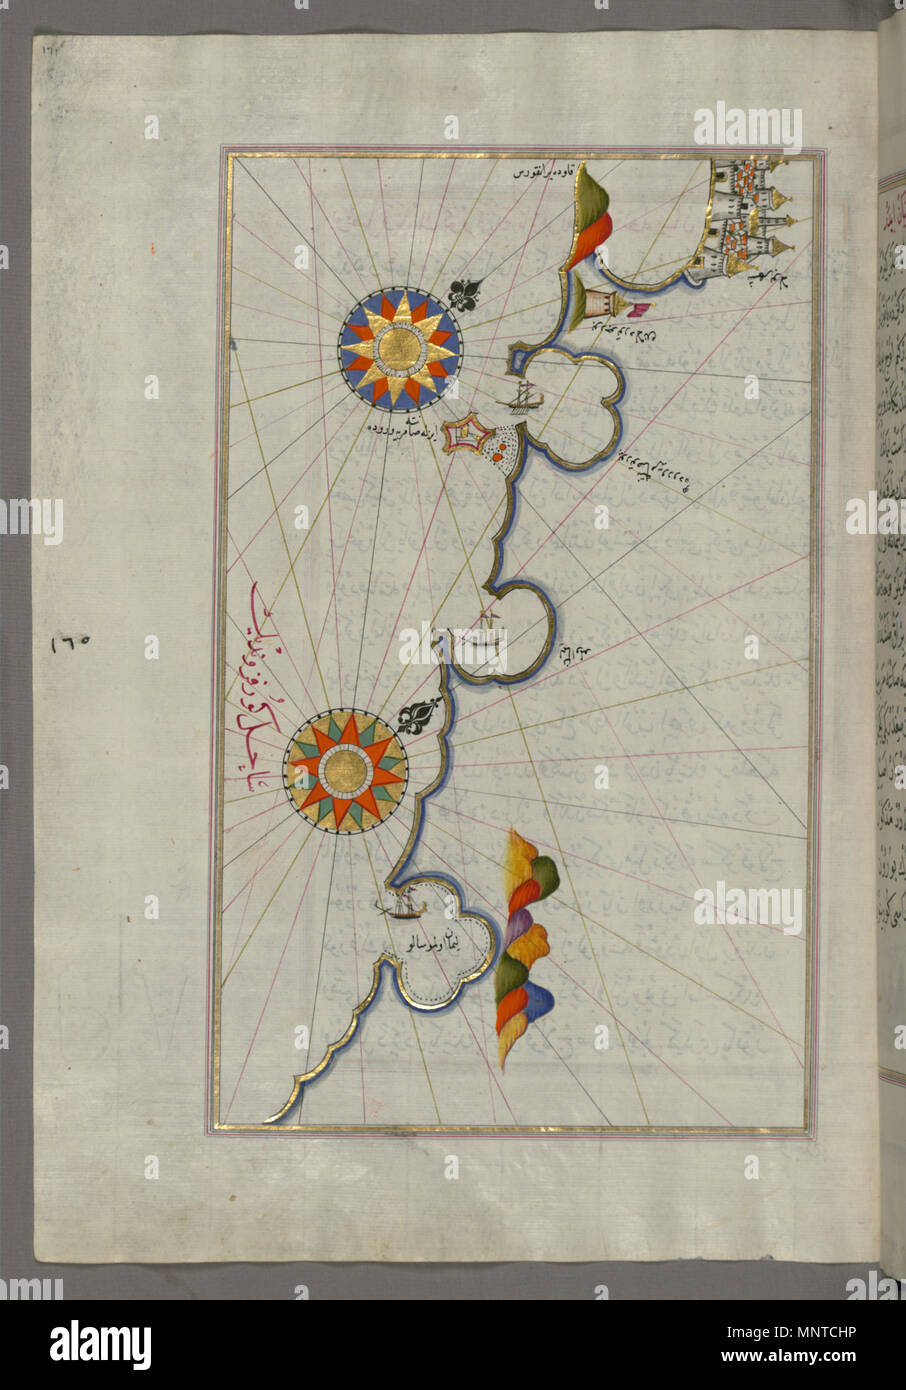 Piri Reis (Turkish, 1465-1555). 'Leaf from Book on Navigation,' 17th-18th century. ink, paint, and gold on paper. Walters Art Museum (W.658.171A): Acquired by Henry Walters. W.658.171a 1003 Piri Reis - Map of the Coast from Medulin as Far as Pula - Walters W658171A - Full Page Stock Photo